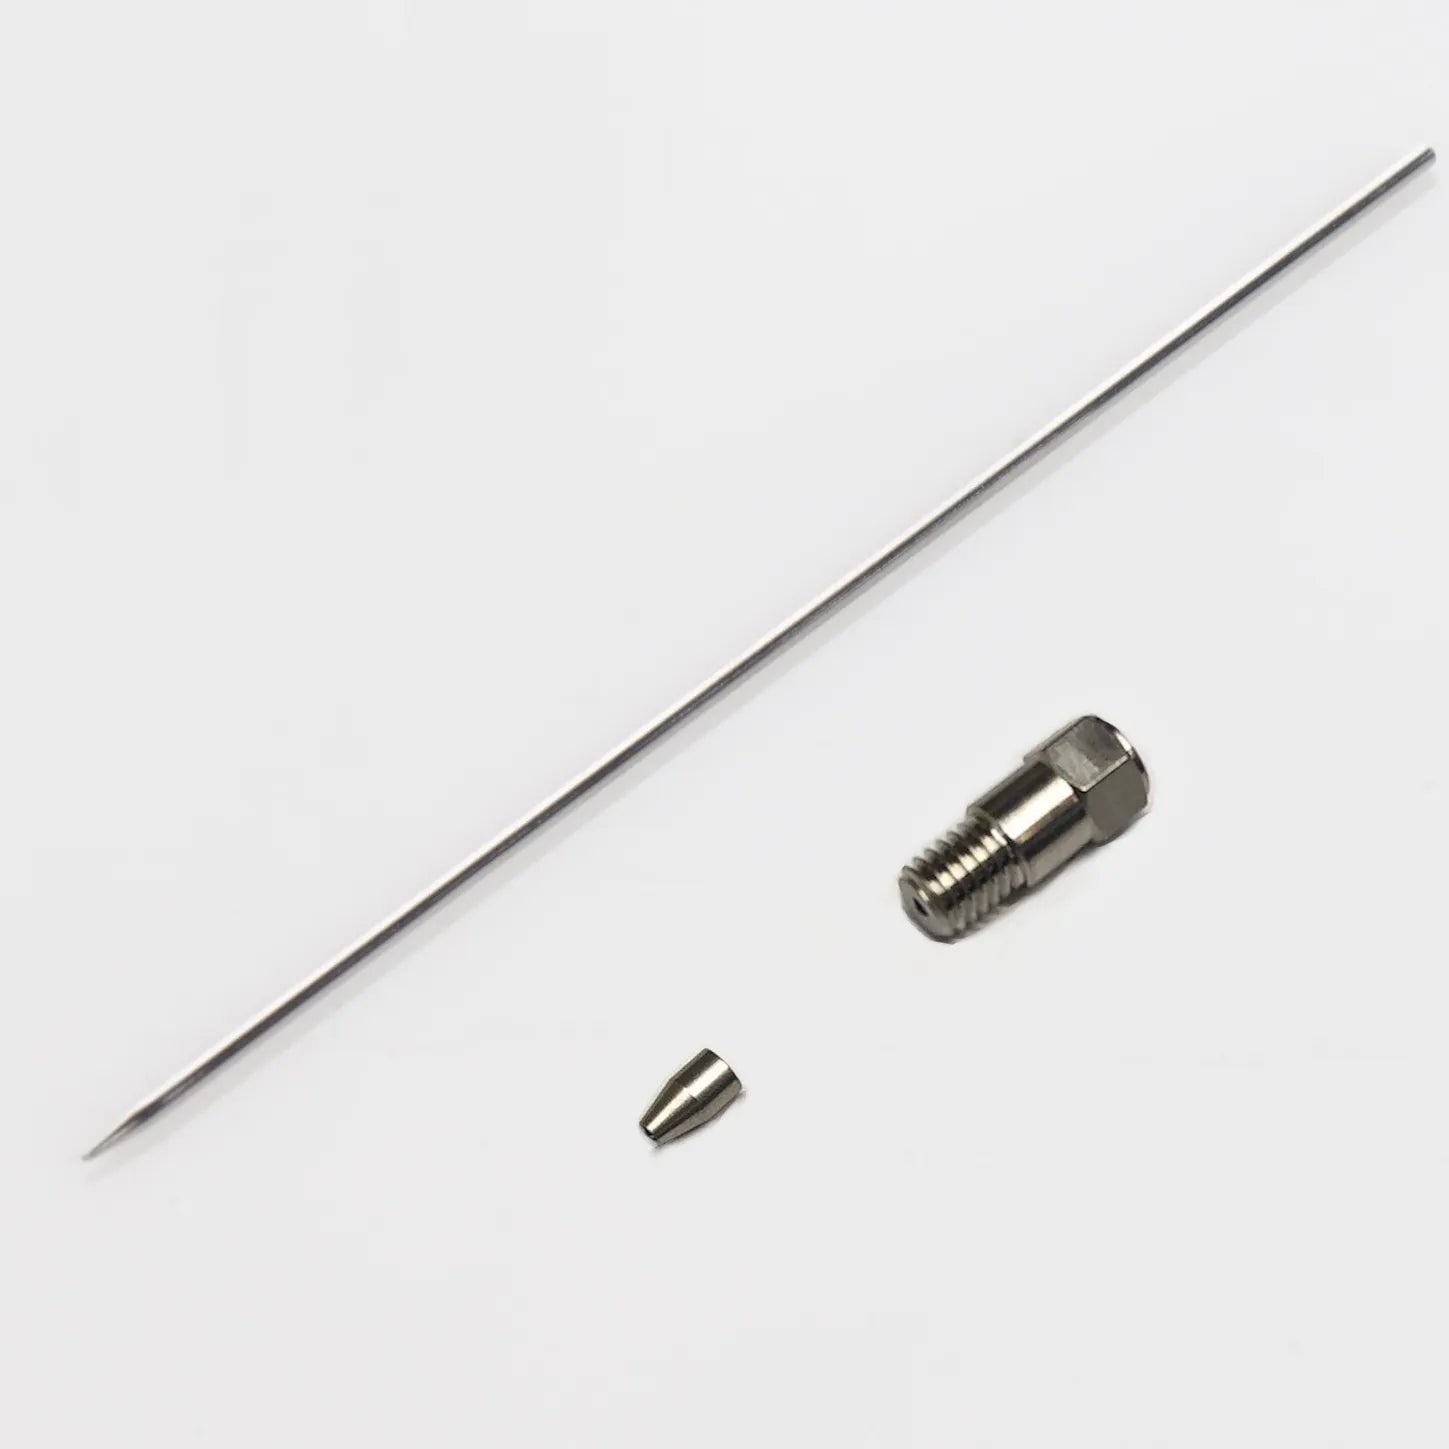 Needle, Uncoated 10 Series, Comparable to Shimadzu # 228-41024-91